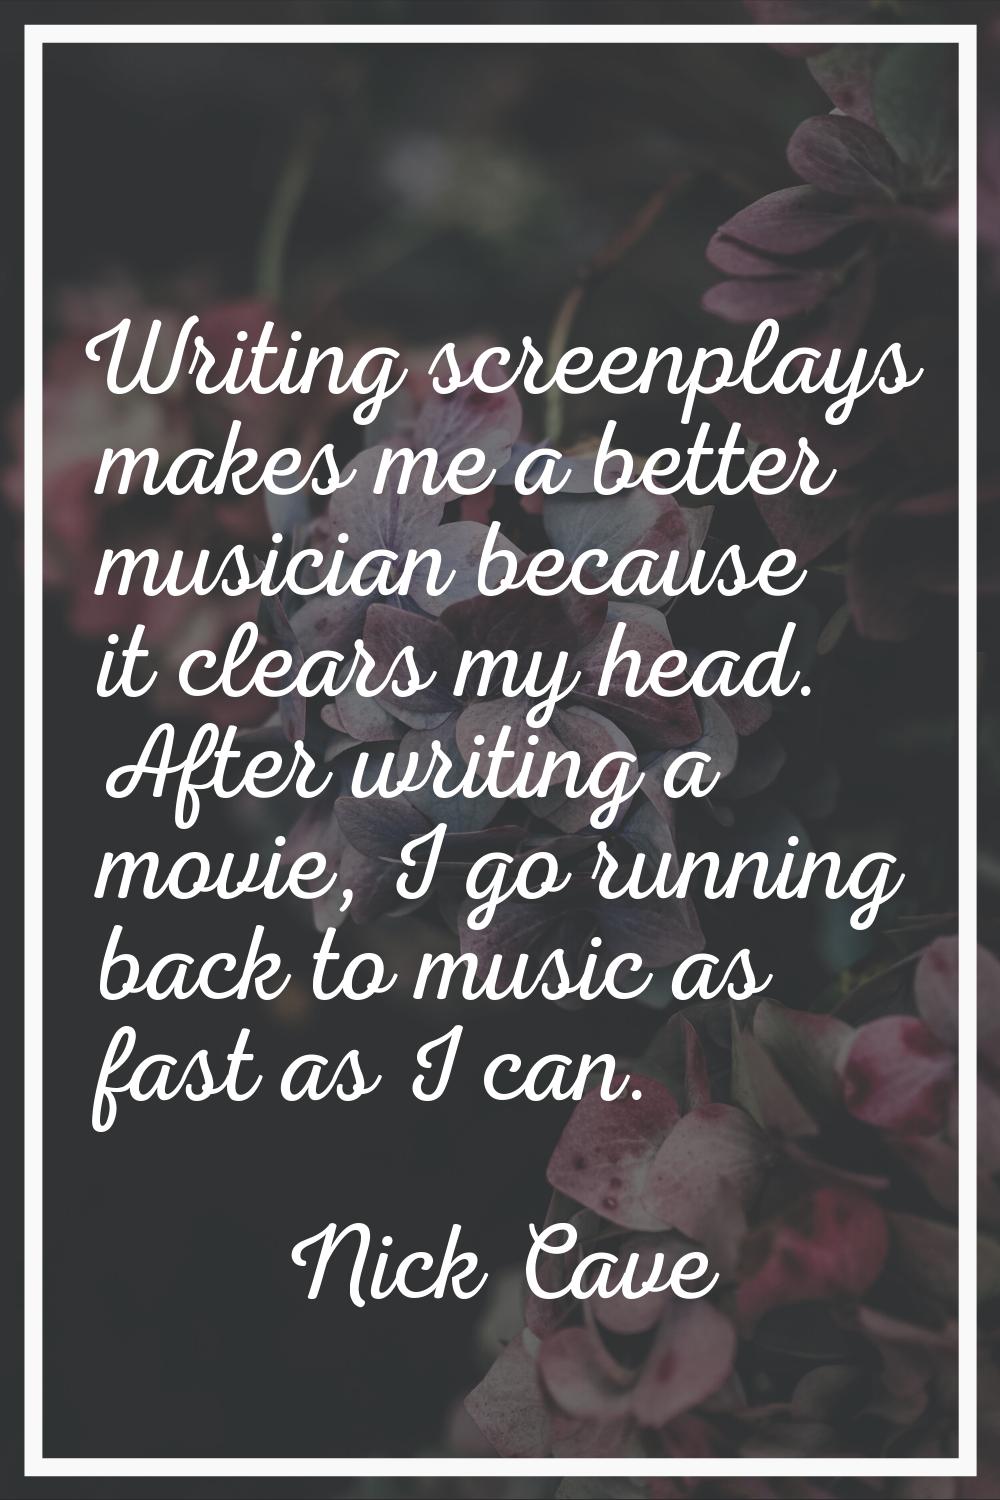 Writing screenplays makes me a better musician because it clears my head. After writing a movie, I 